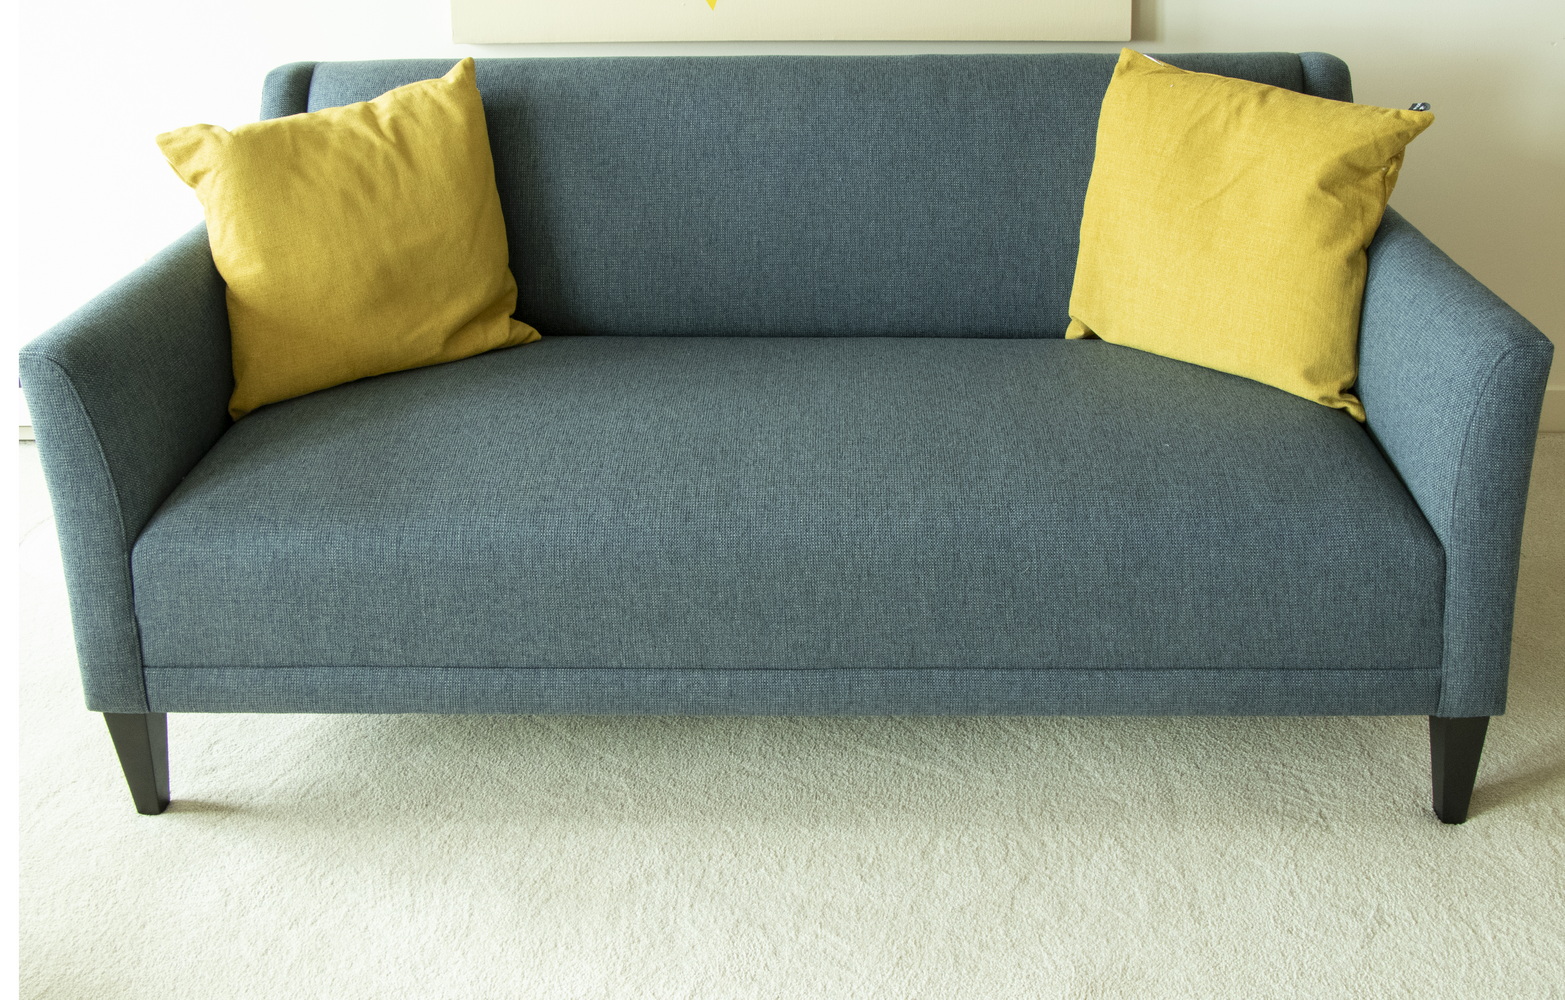 BLUE UPHOLSTERED SOFA Small blue